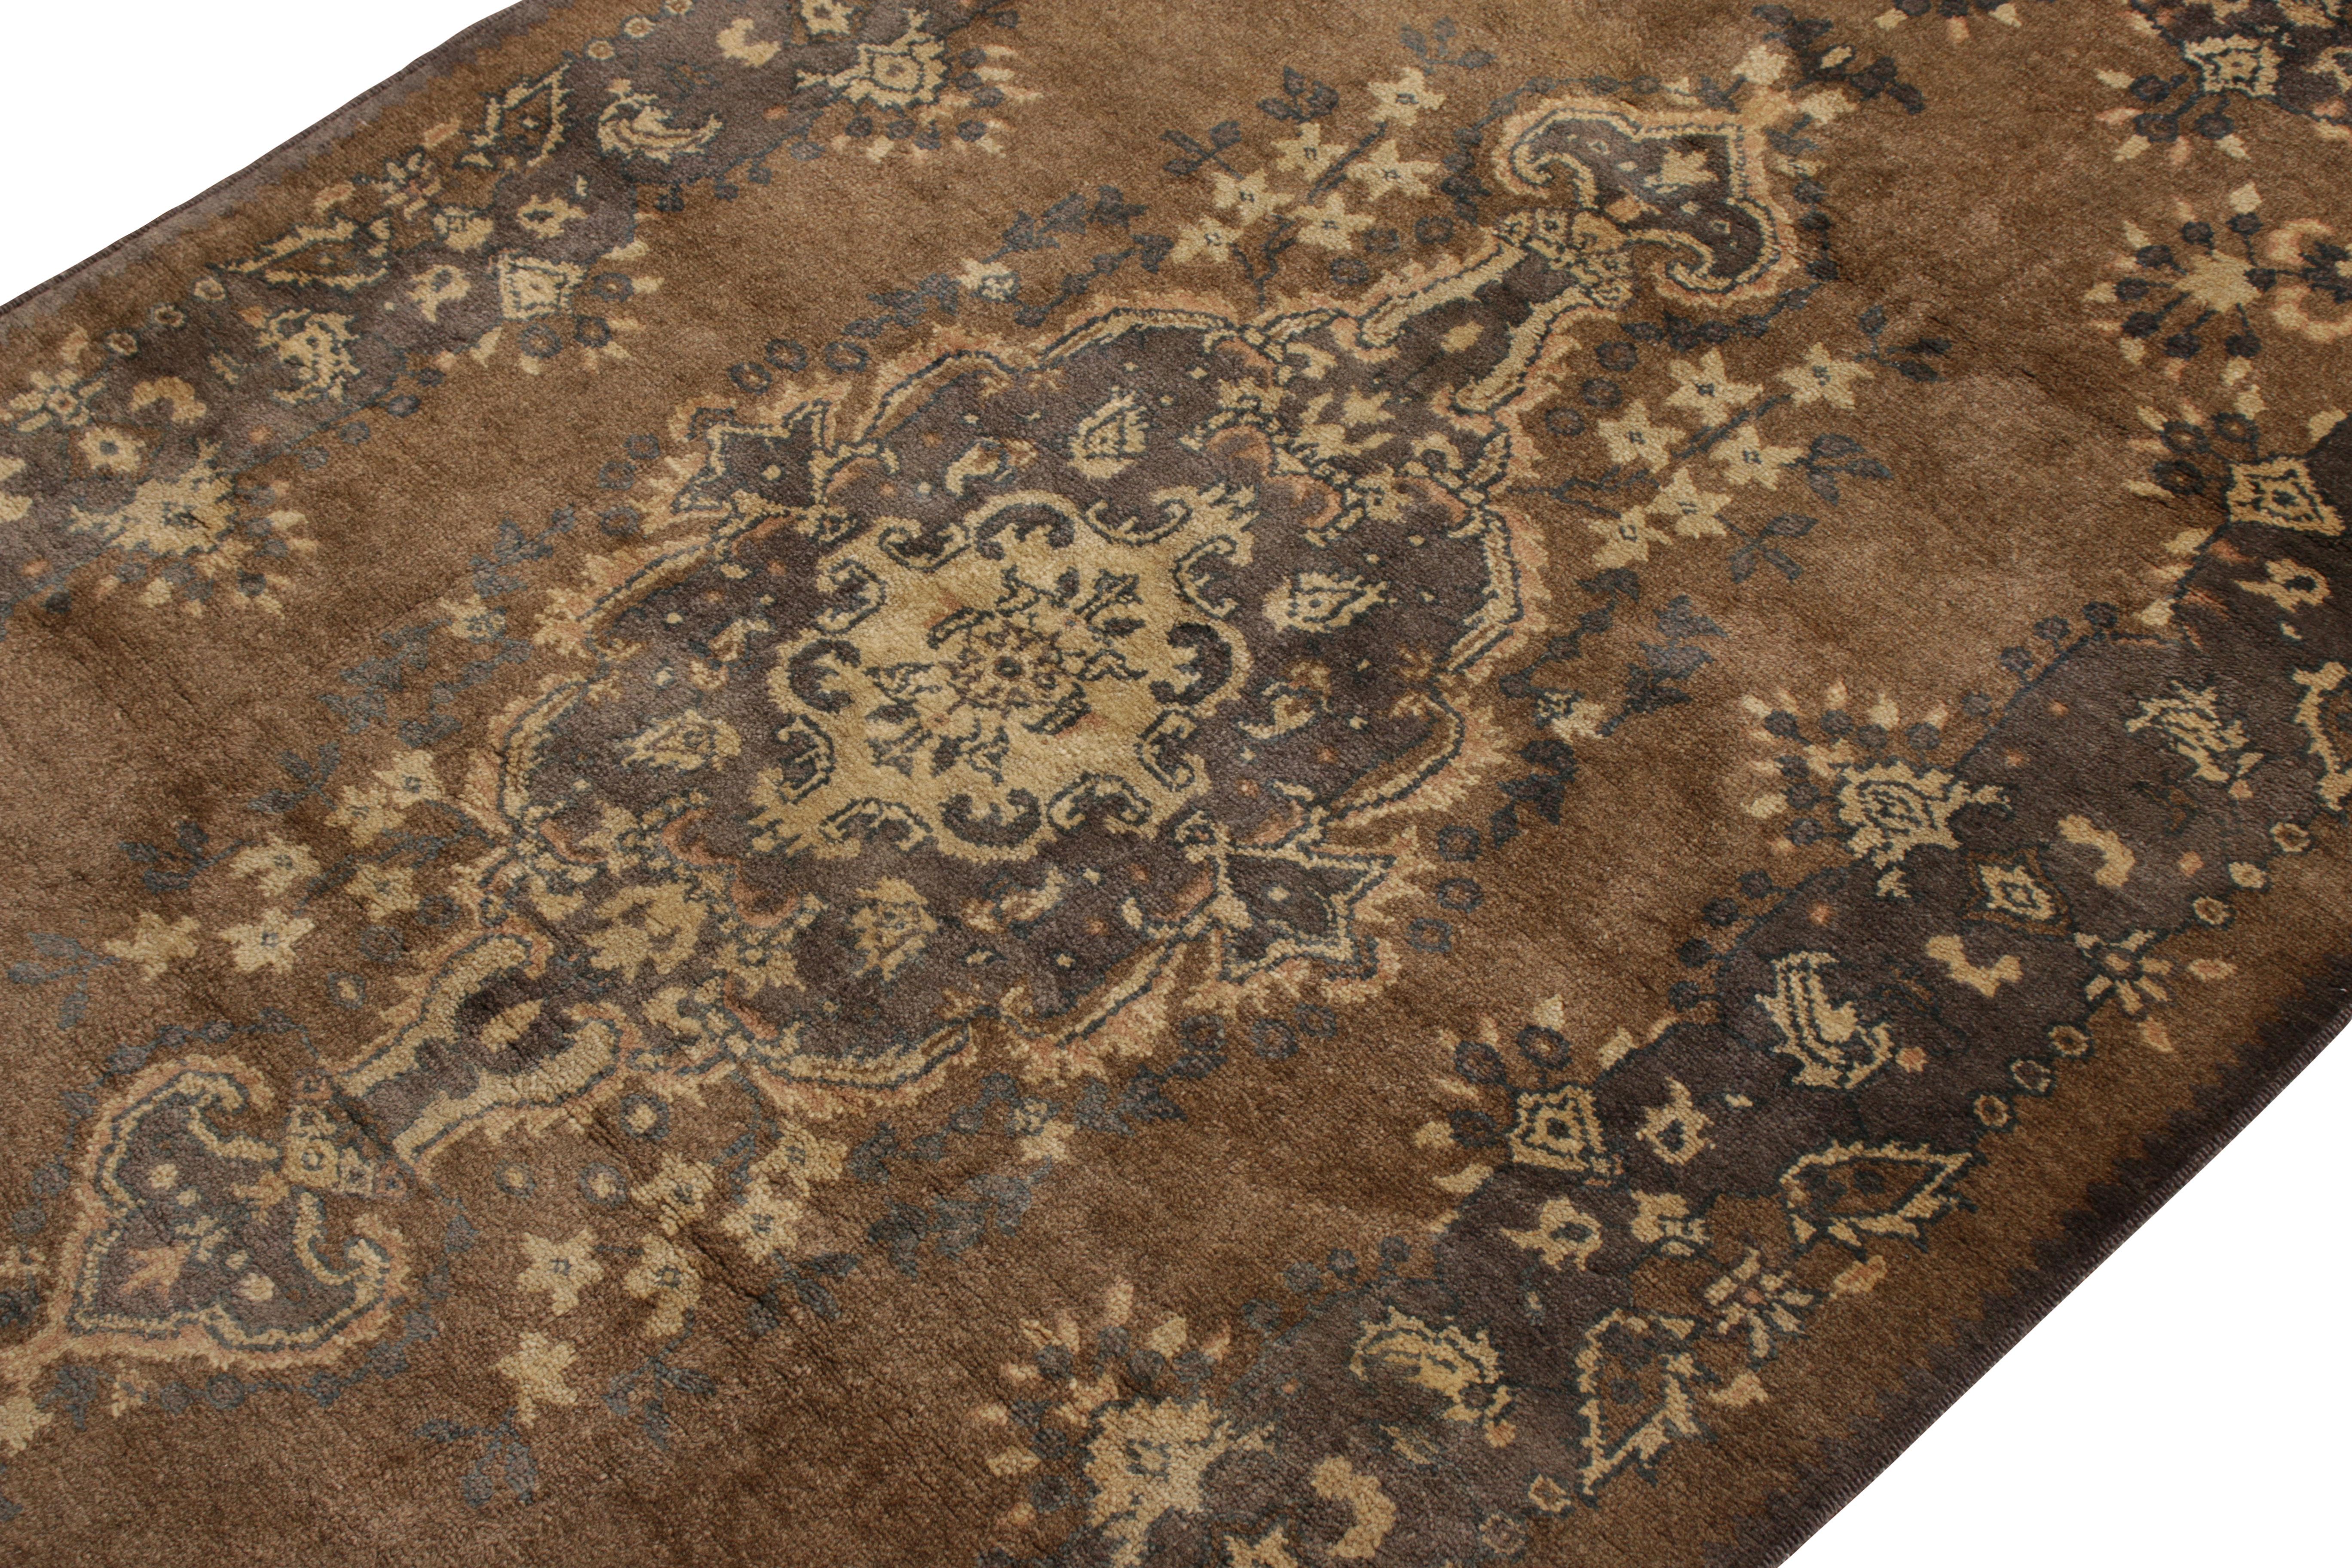 Other Hand-Knotted Vintage Sivas Rug in Beige-Brown with Medallion Floral Pattern For Sale